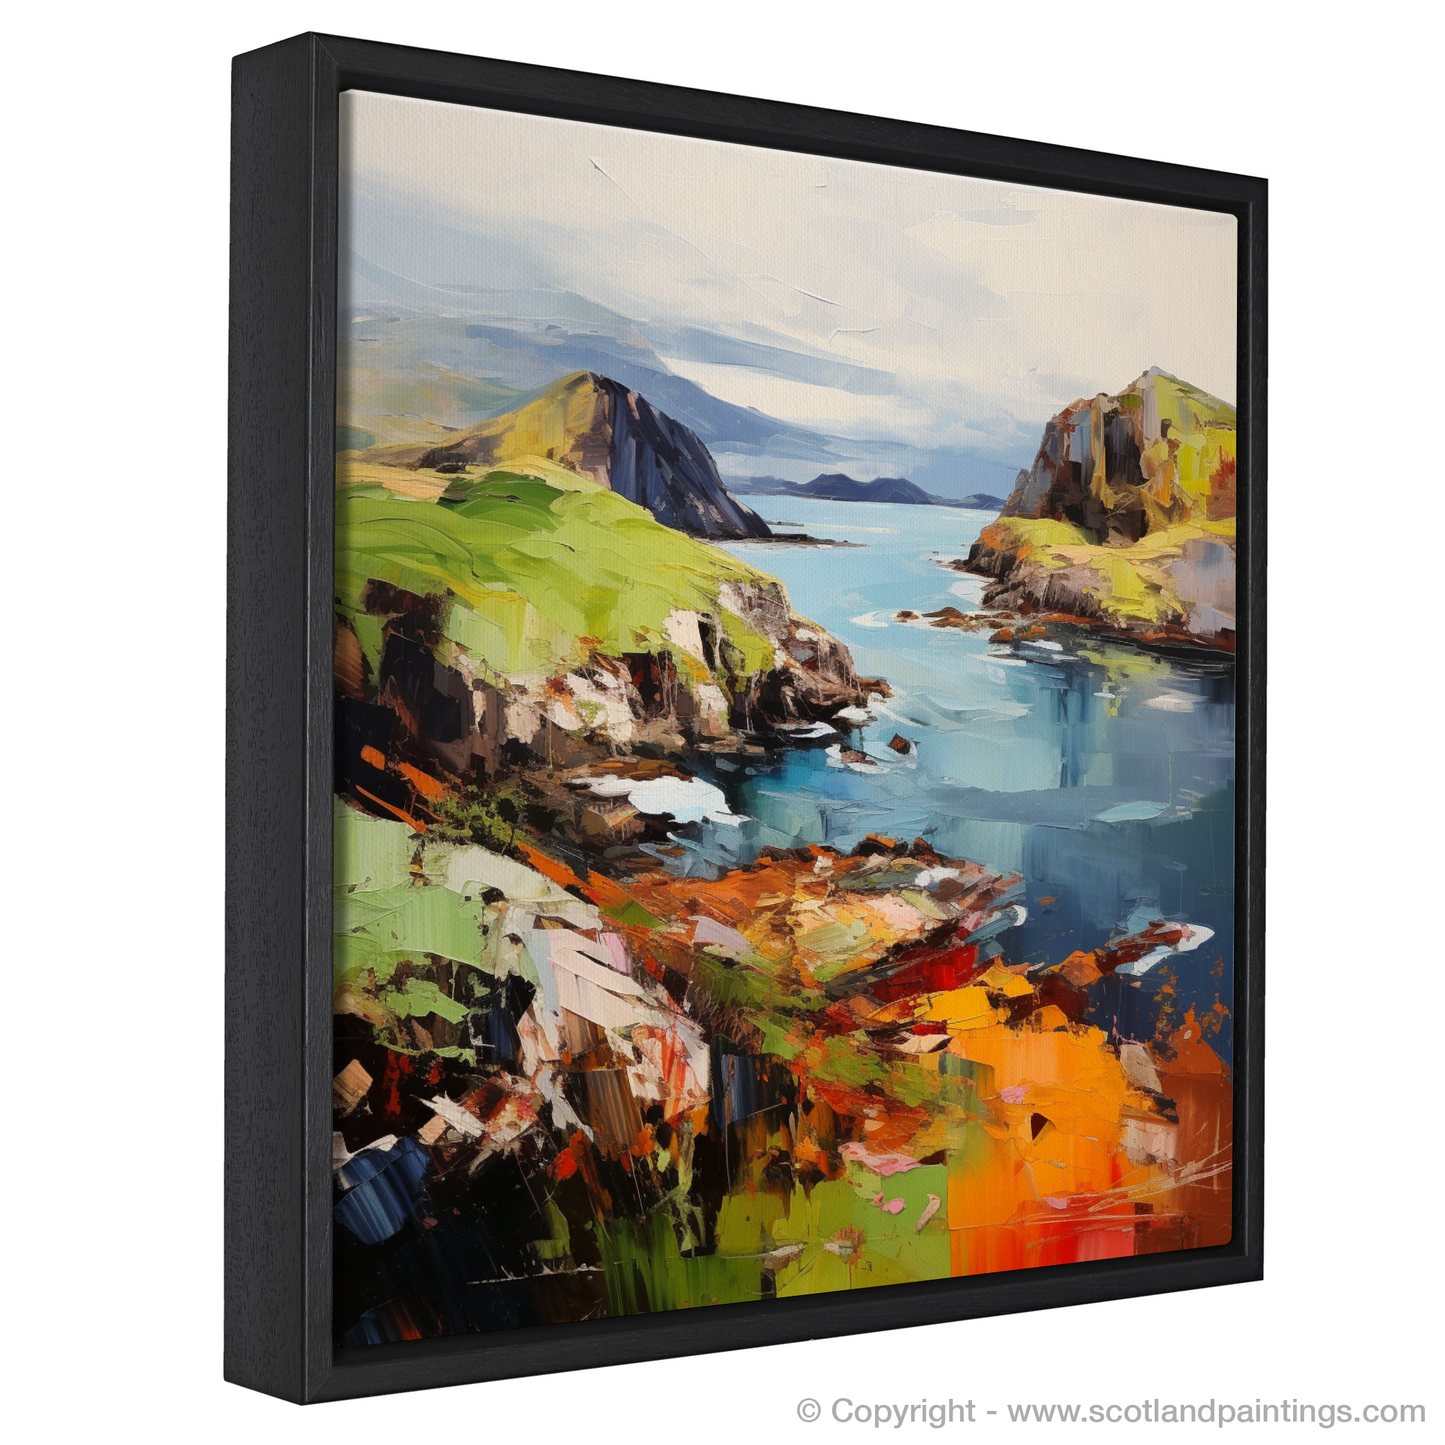 Painting and Art Print of Easdale Sound, Easdale, Argyll and Bute entitled "Emerald Shores and Rugged Cliffs: An Expressionist Journey Through Easdale Sound".